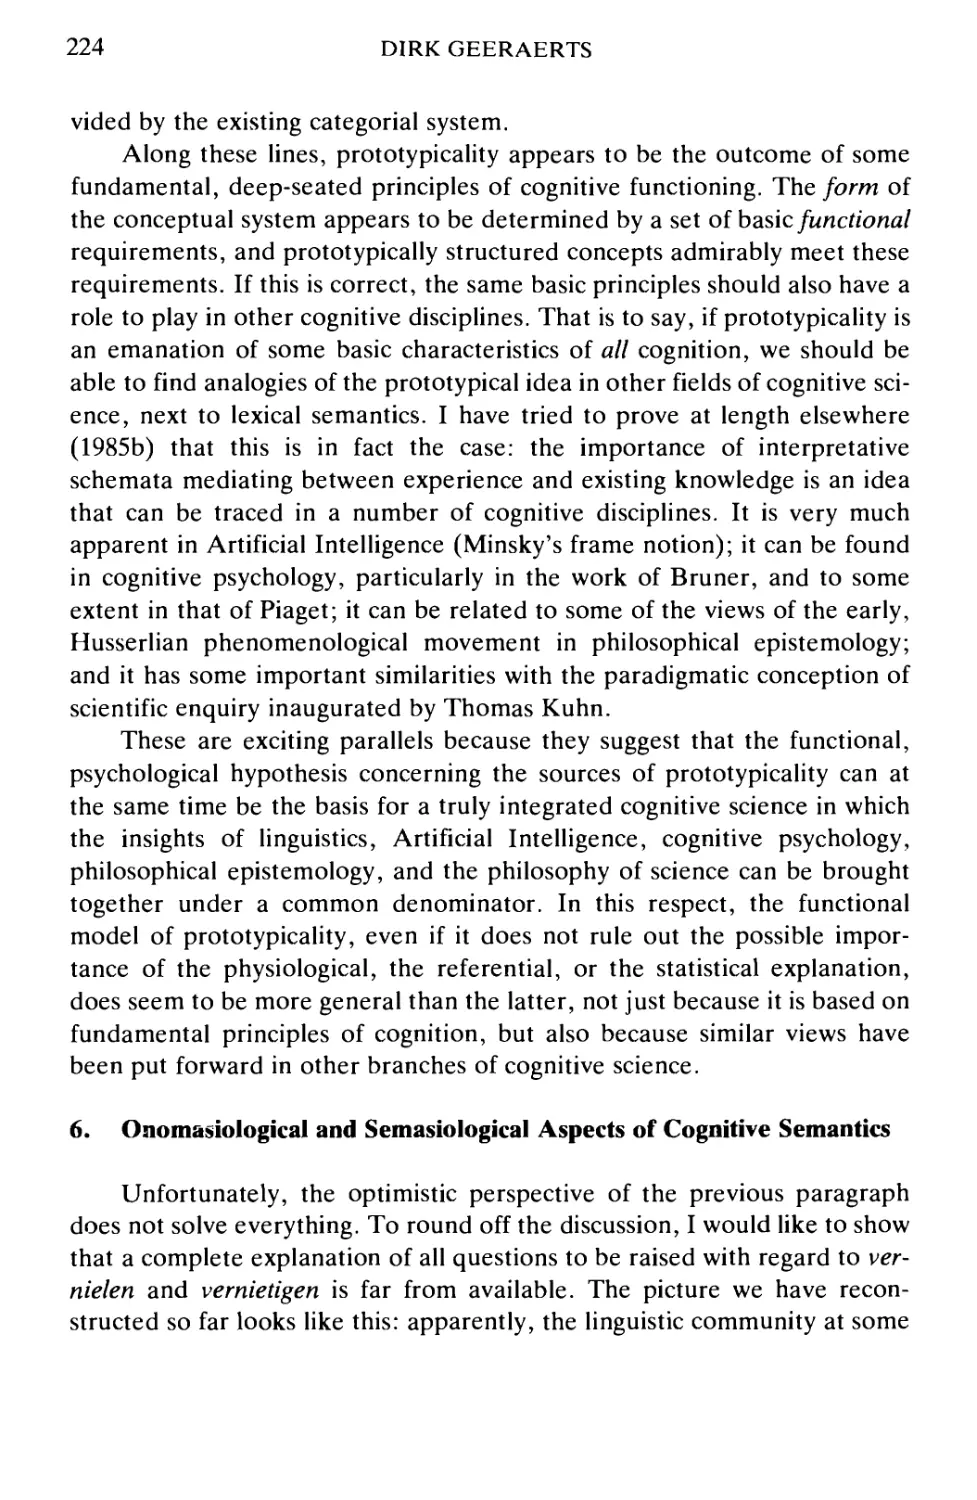 6. Onomasiological and Semasiological Aspects of Cognitive Semantics